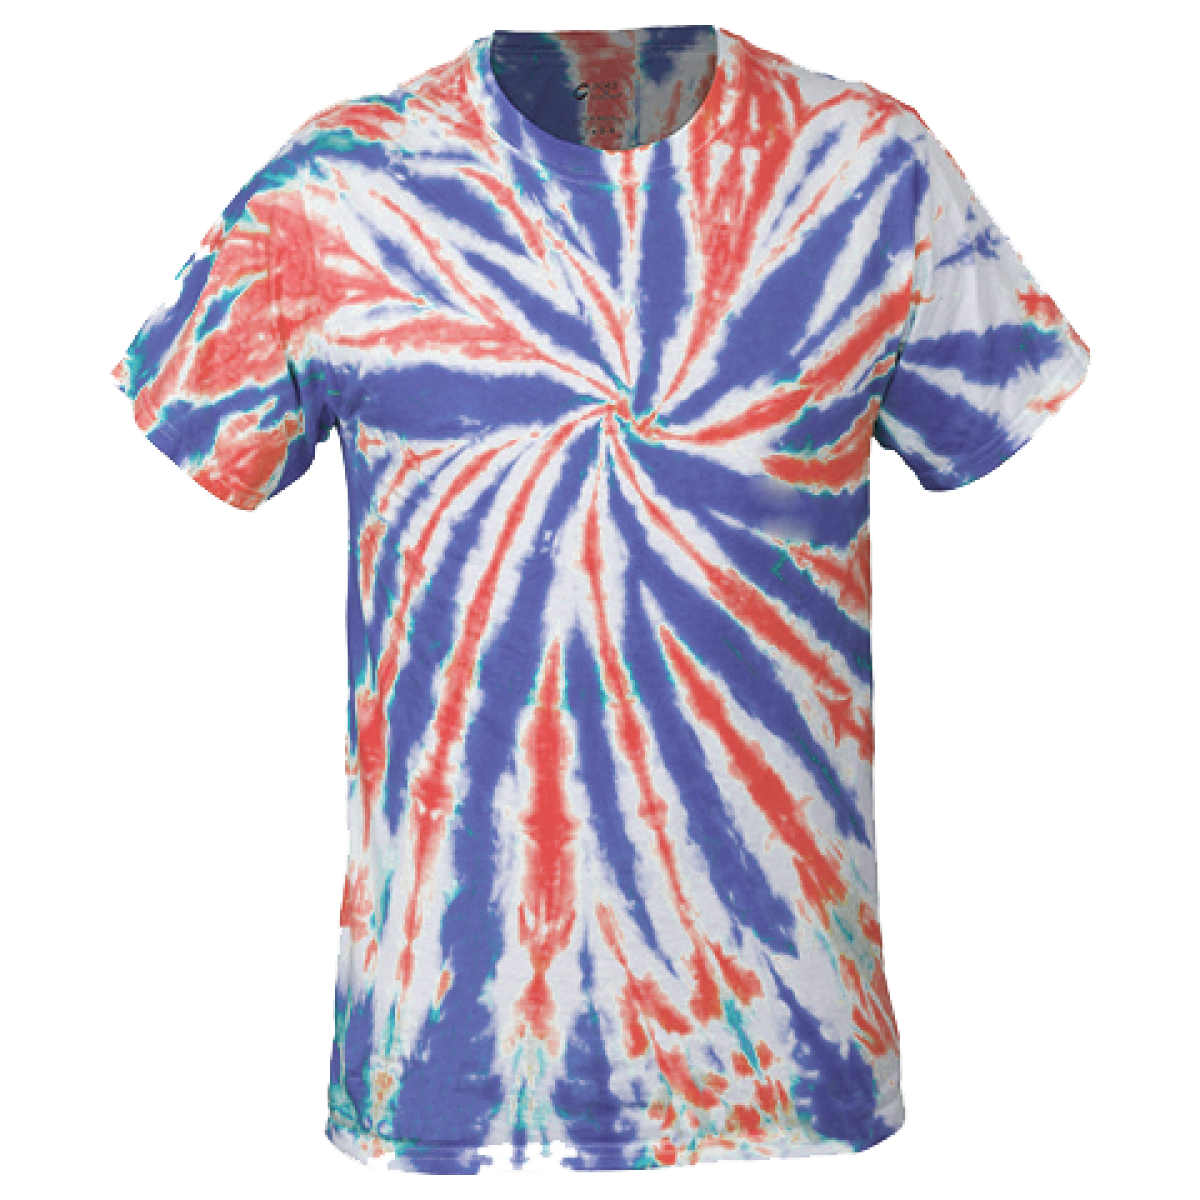 Multi-Color Tie-Dye Tee -Red/White/Blue-XL